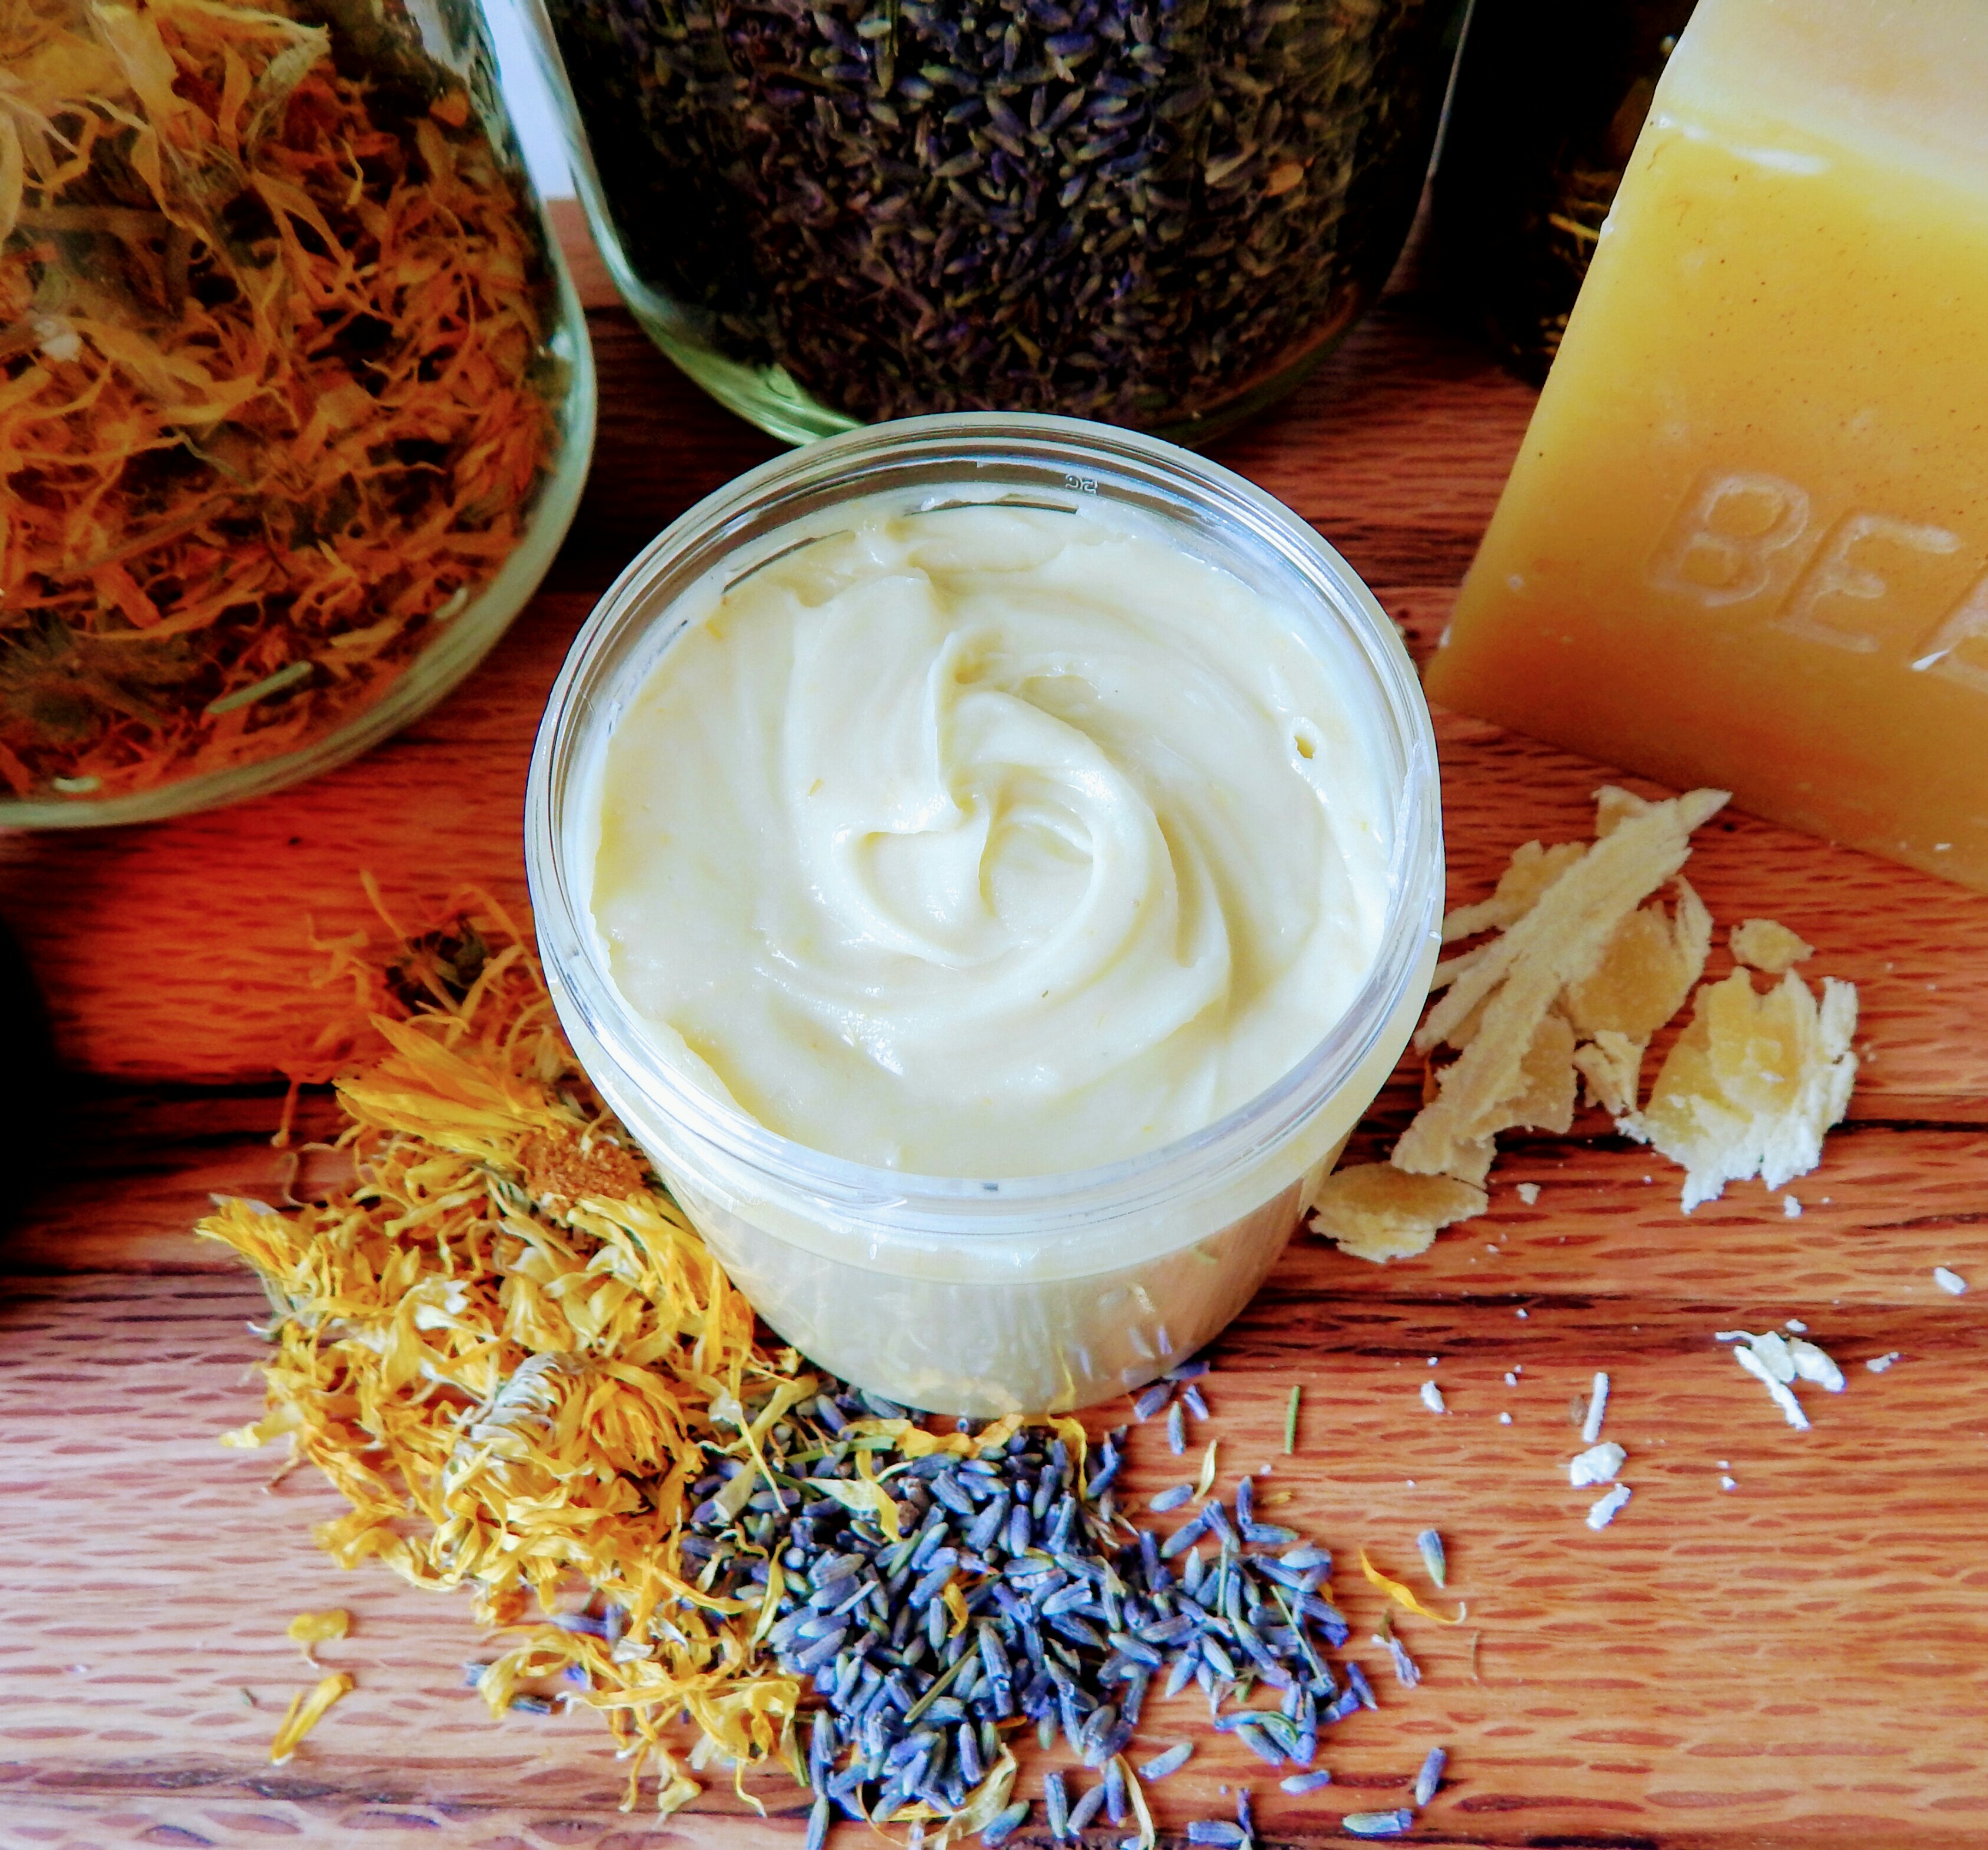 A Guide To Use Essential Oils In Body Butter And DIY Recipes